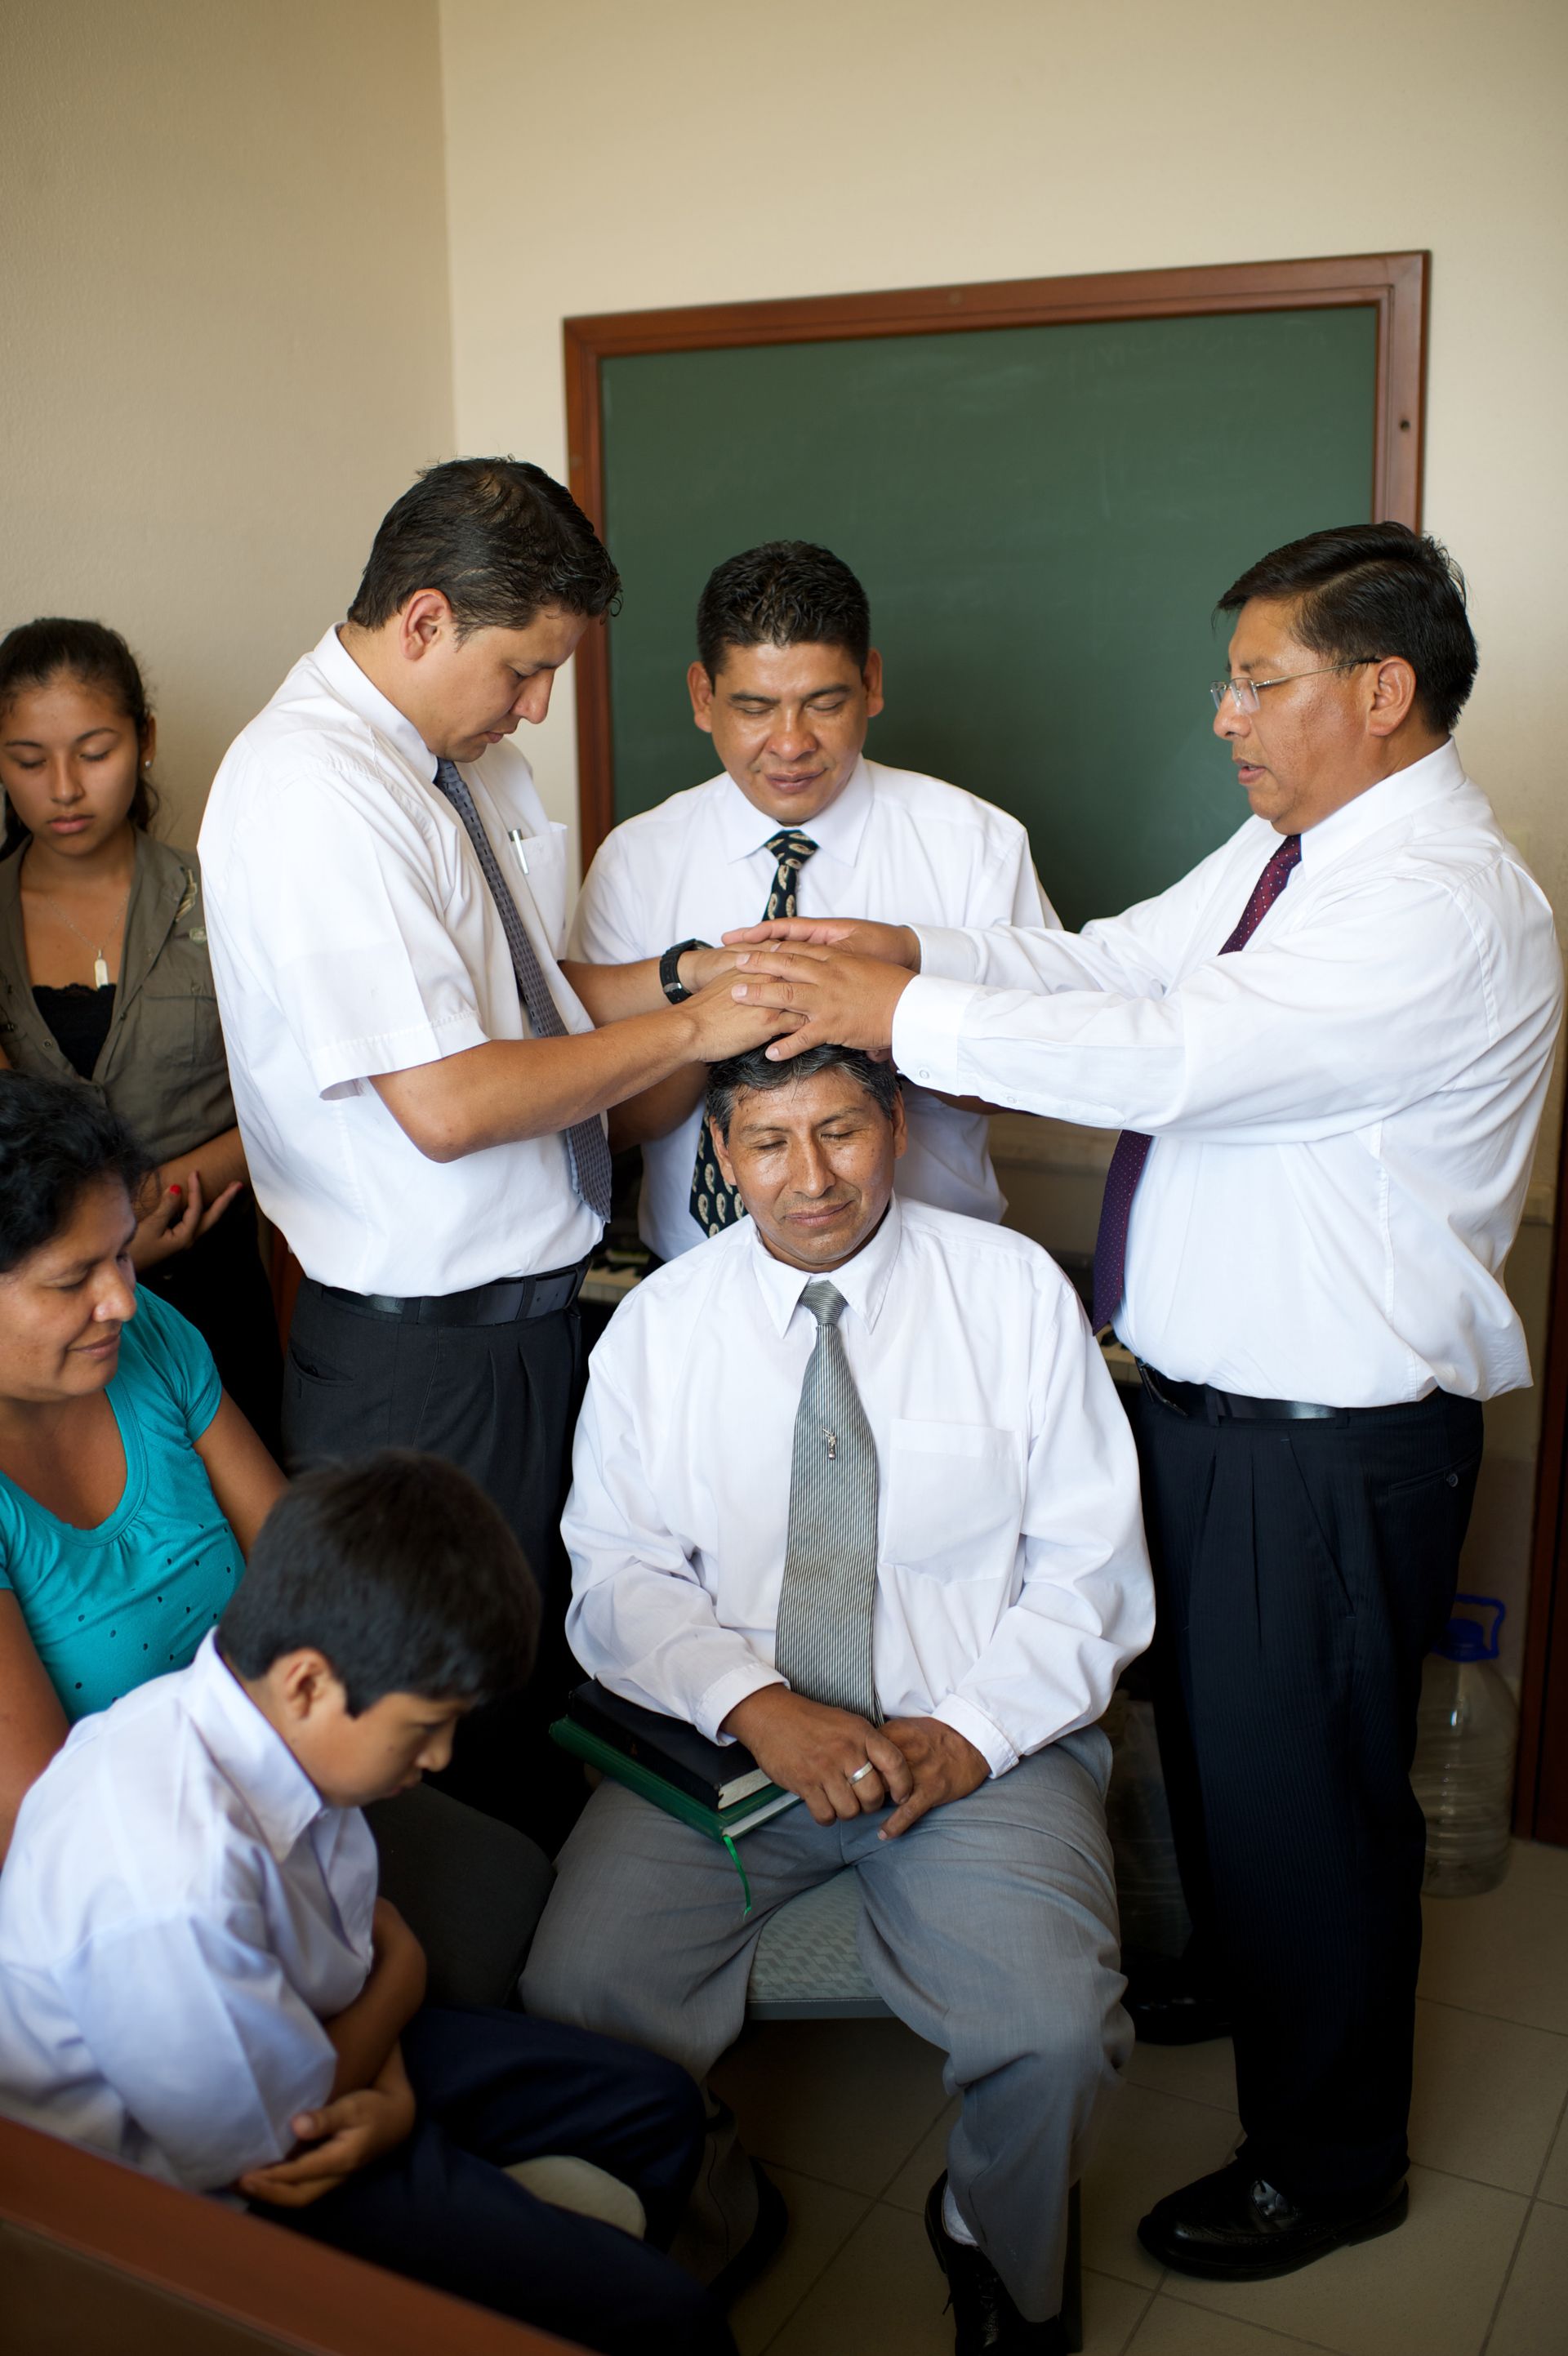 A man receiving a priesthood blessing in Bolivia.